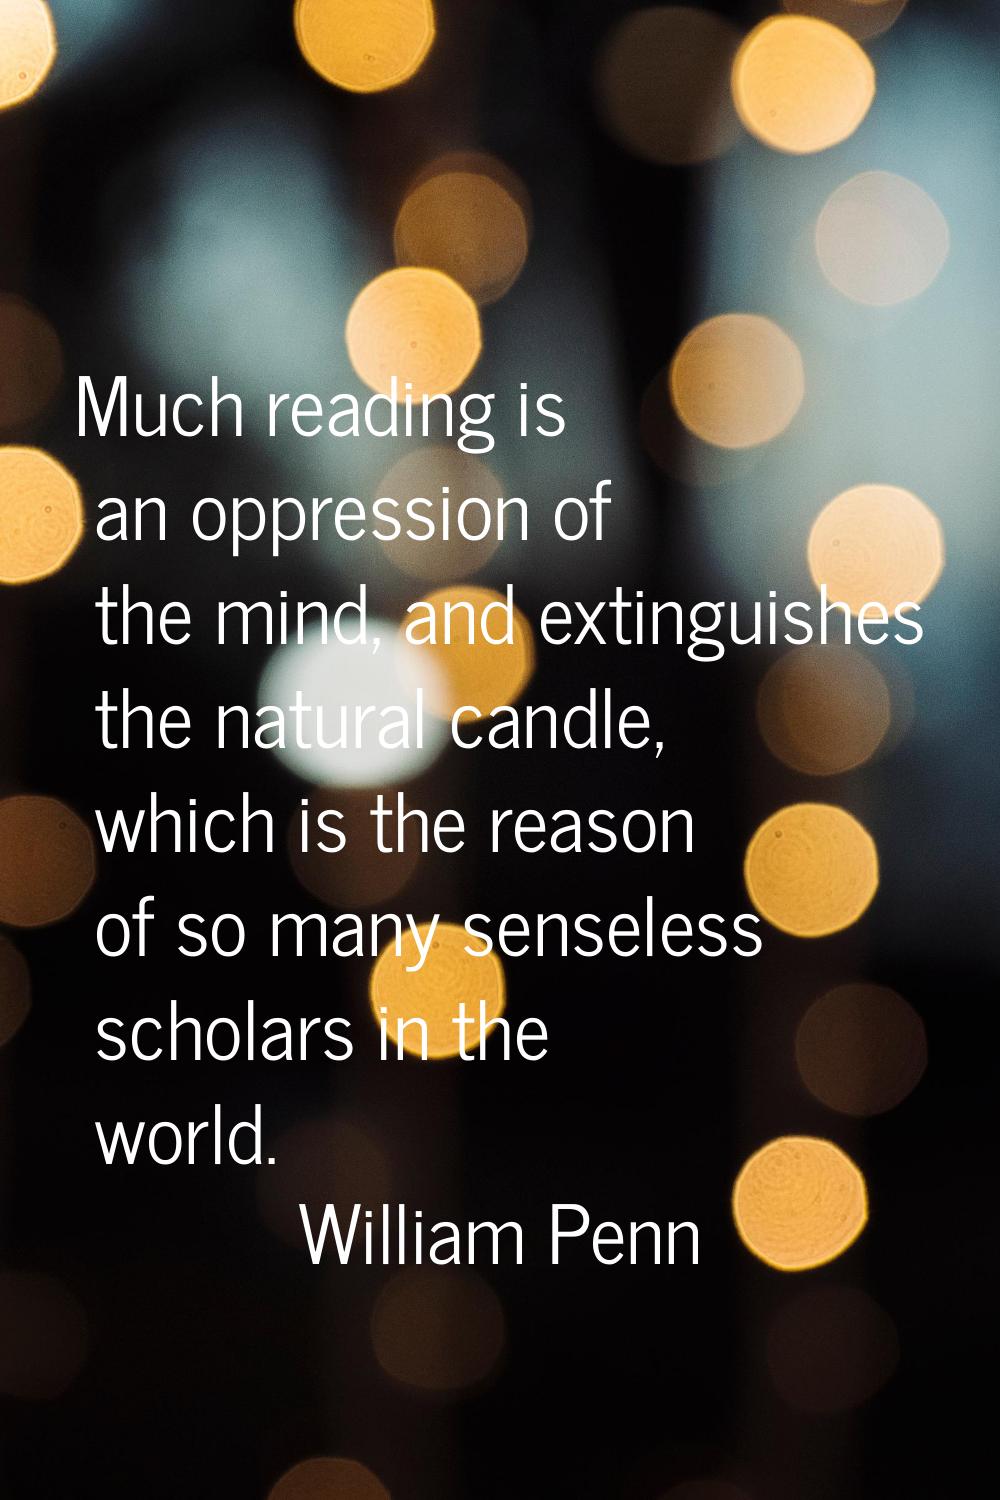 Much reading is an oppression of the mind, and extinguishes the natural candle, which is the reason